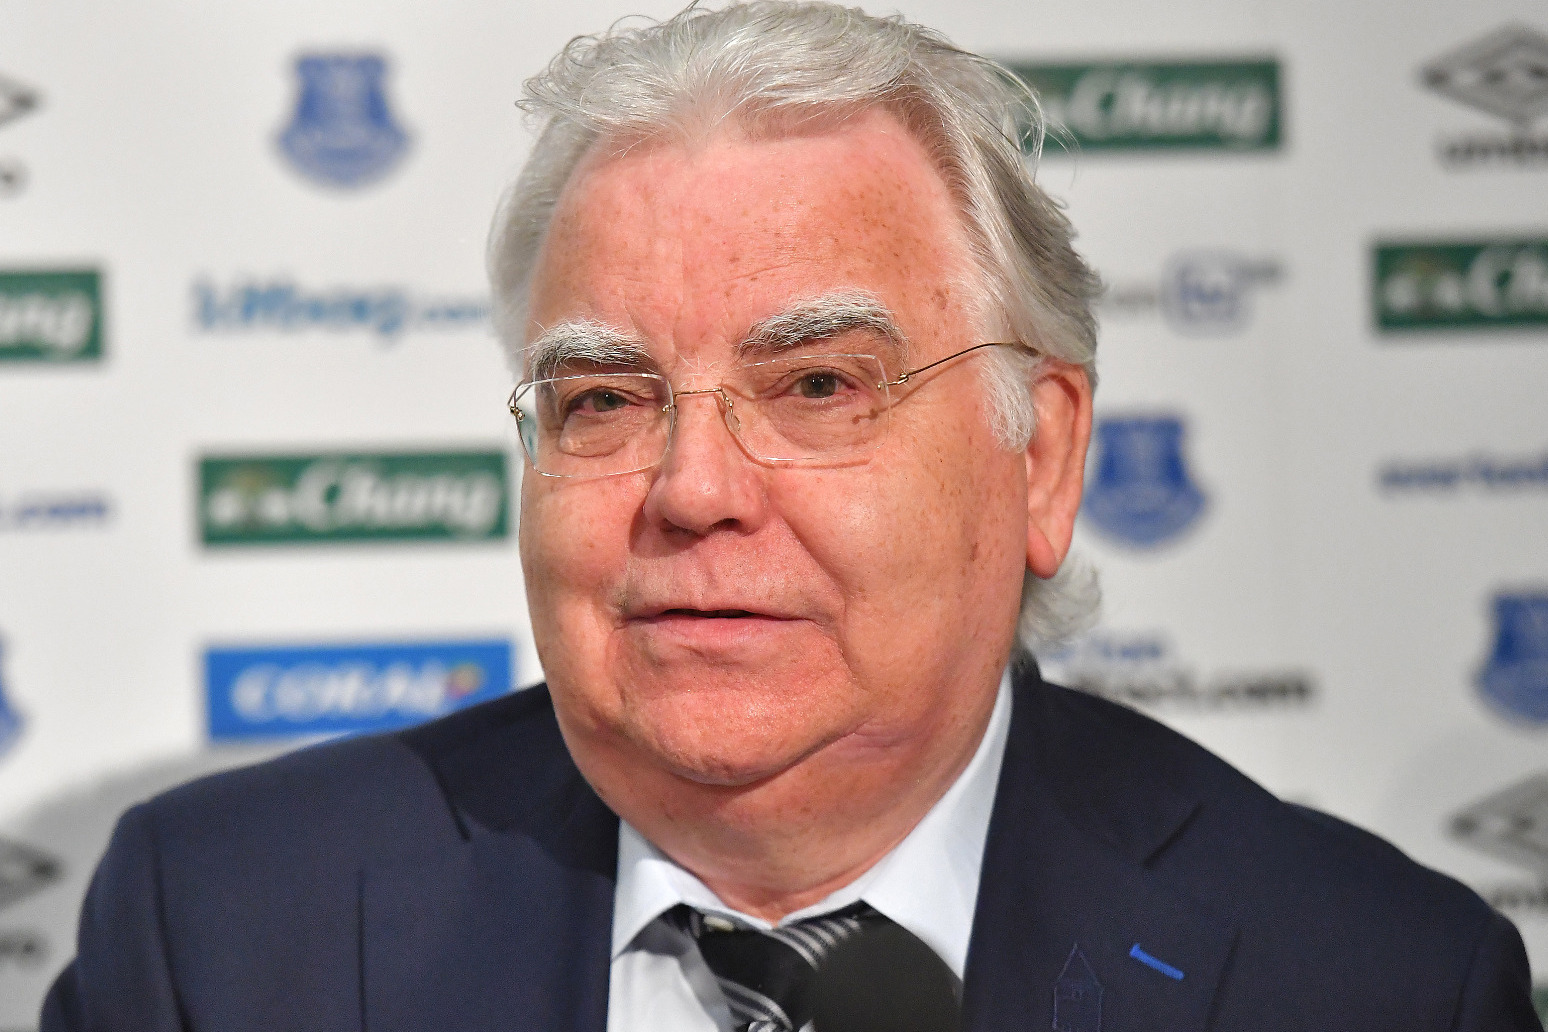 Everton chairman Bill Kenwright dies aged 78 after cancer battle 